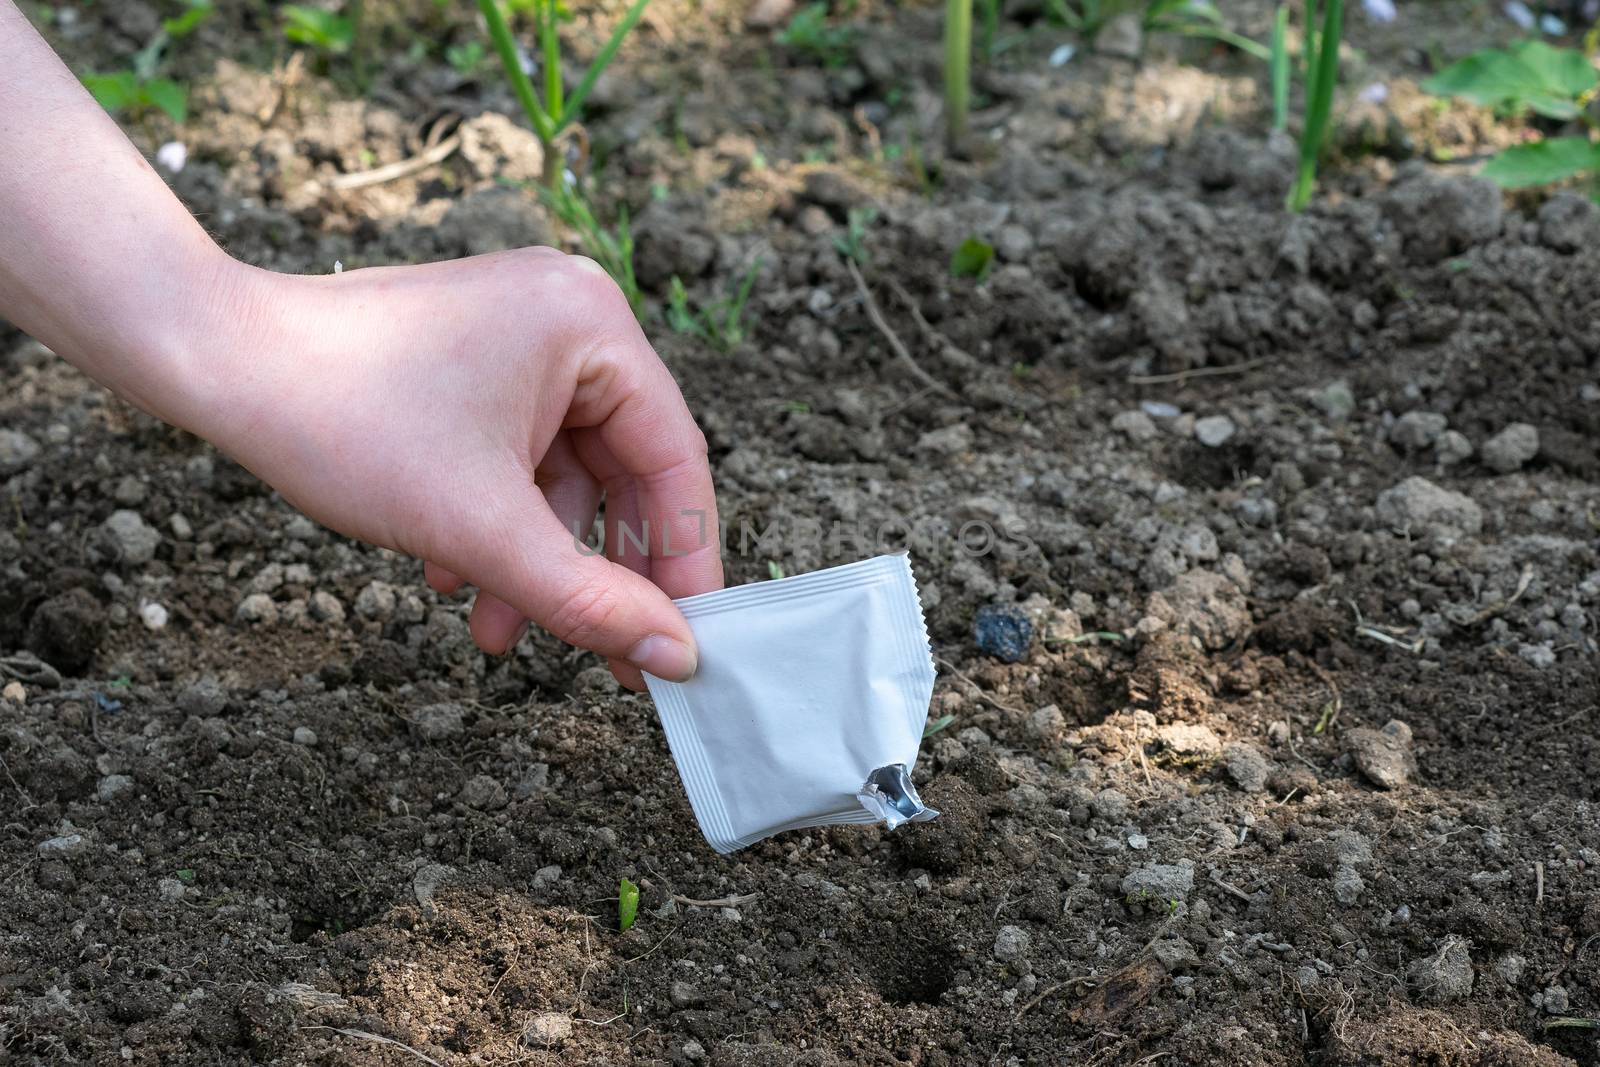 Hands sowing seeds into the soil in the vegetable garden. Spring gardening.